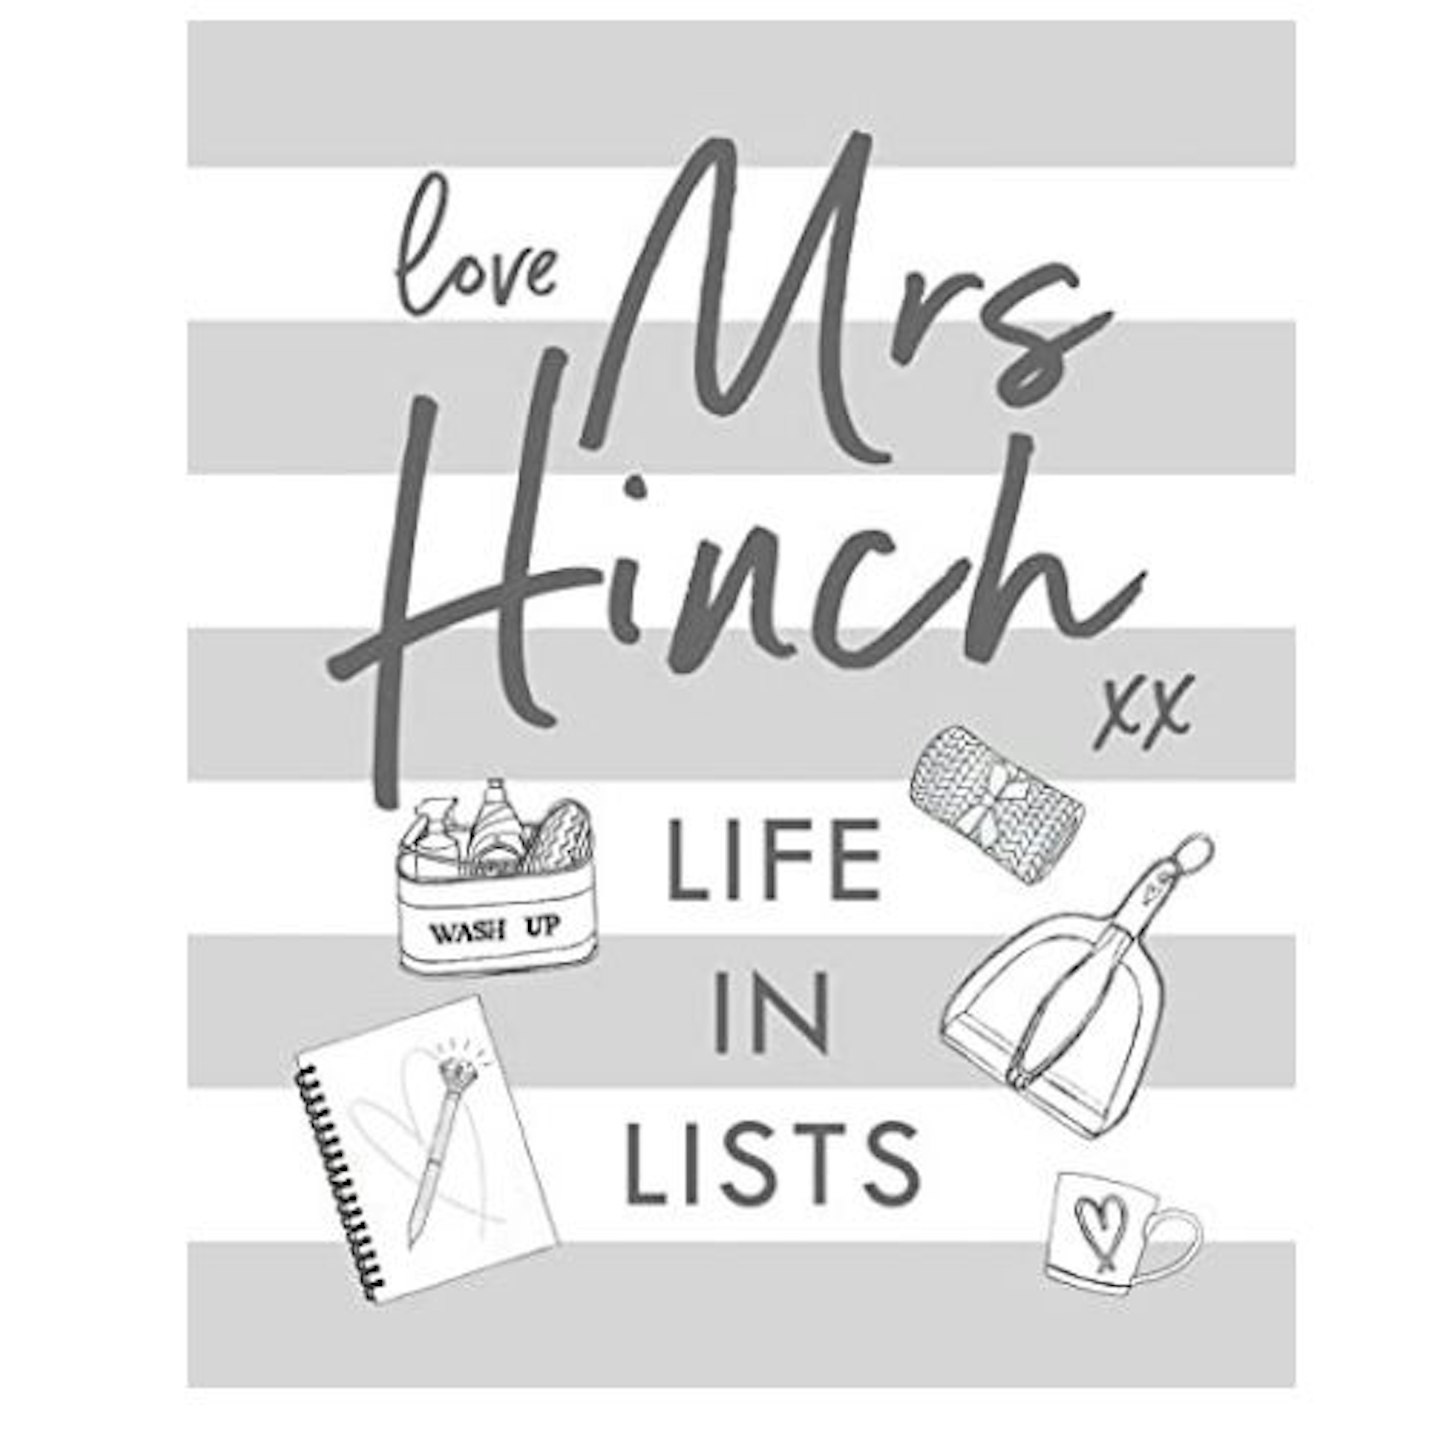 Mrs Hinch: Life in Lists